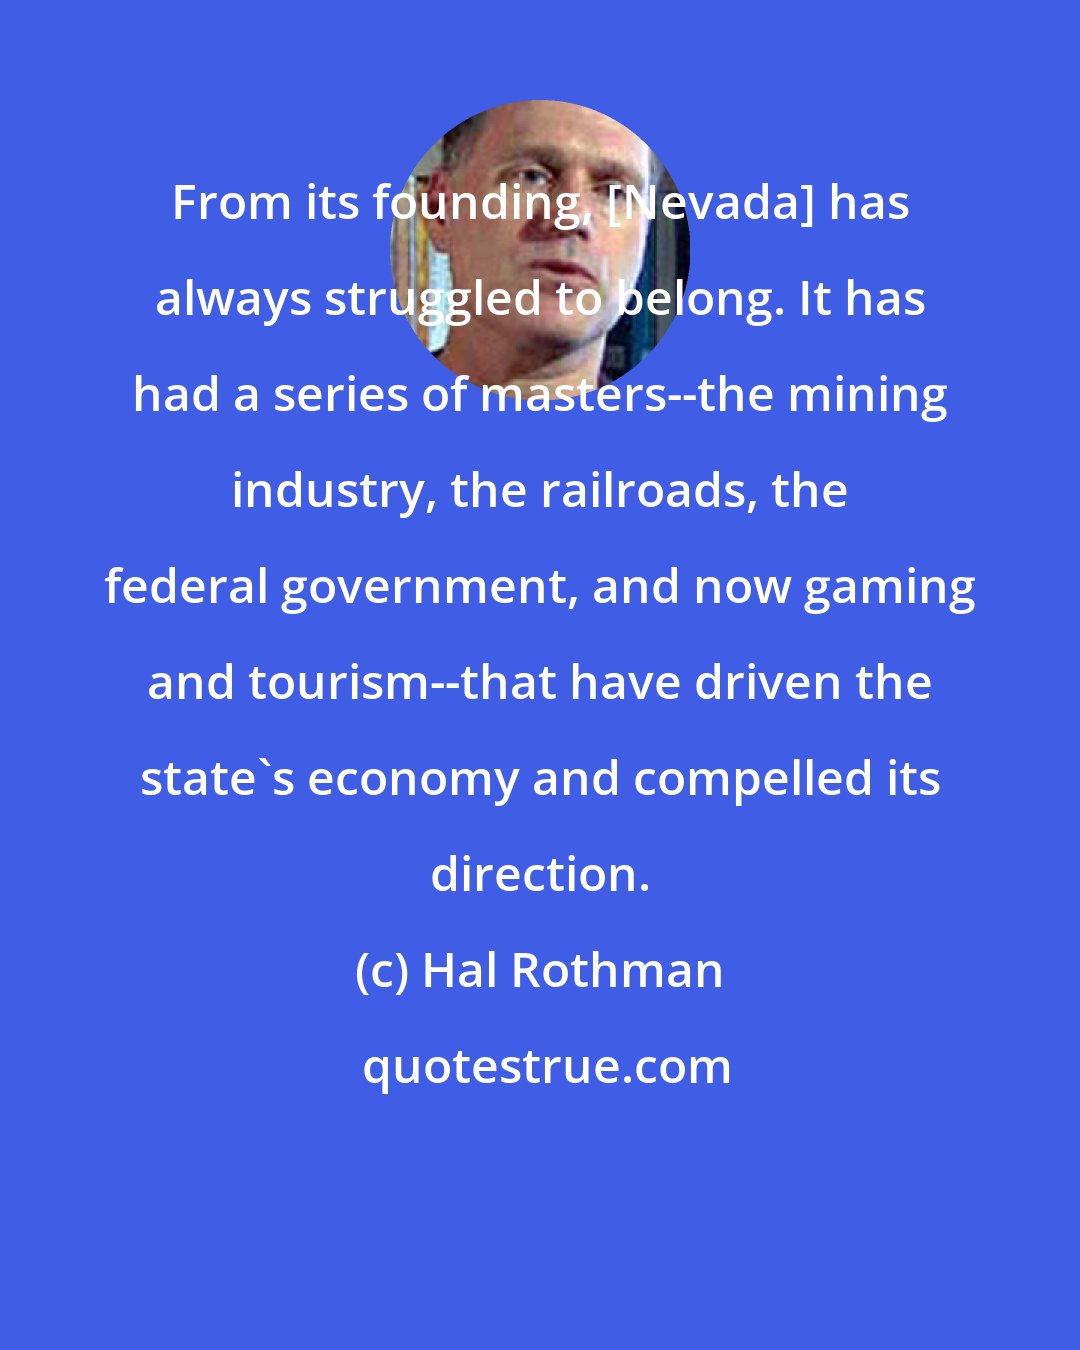 Hal Rothman: From its founding, [Nevada] has always struggled to belong. It has had a series of masters--the mining industry, the railroads, the federal government, and now gaming and tourism--that have driven the state's economy and compelled its direction.